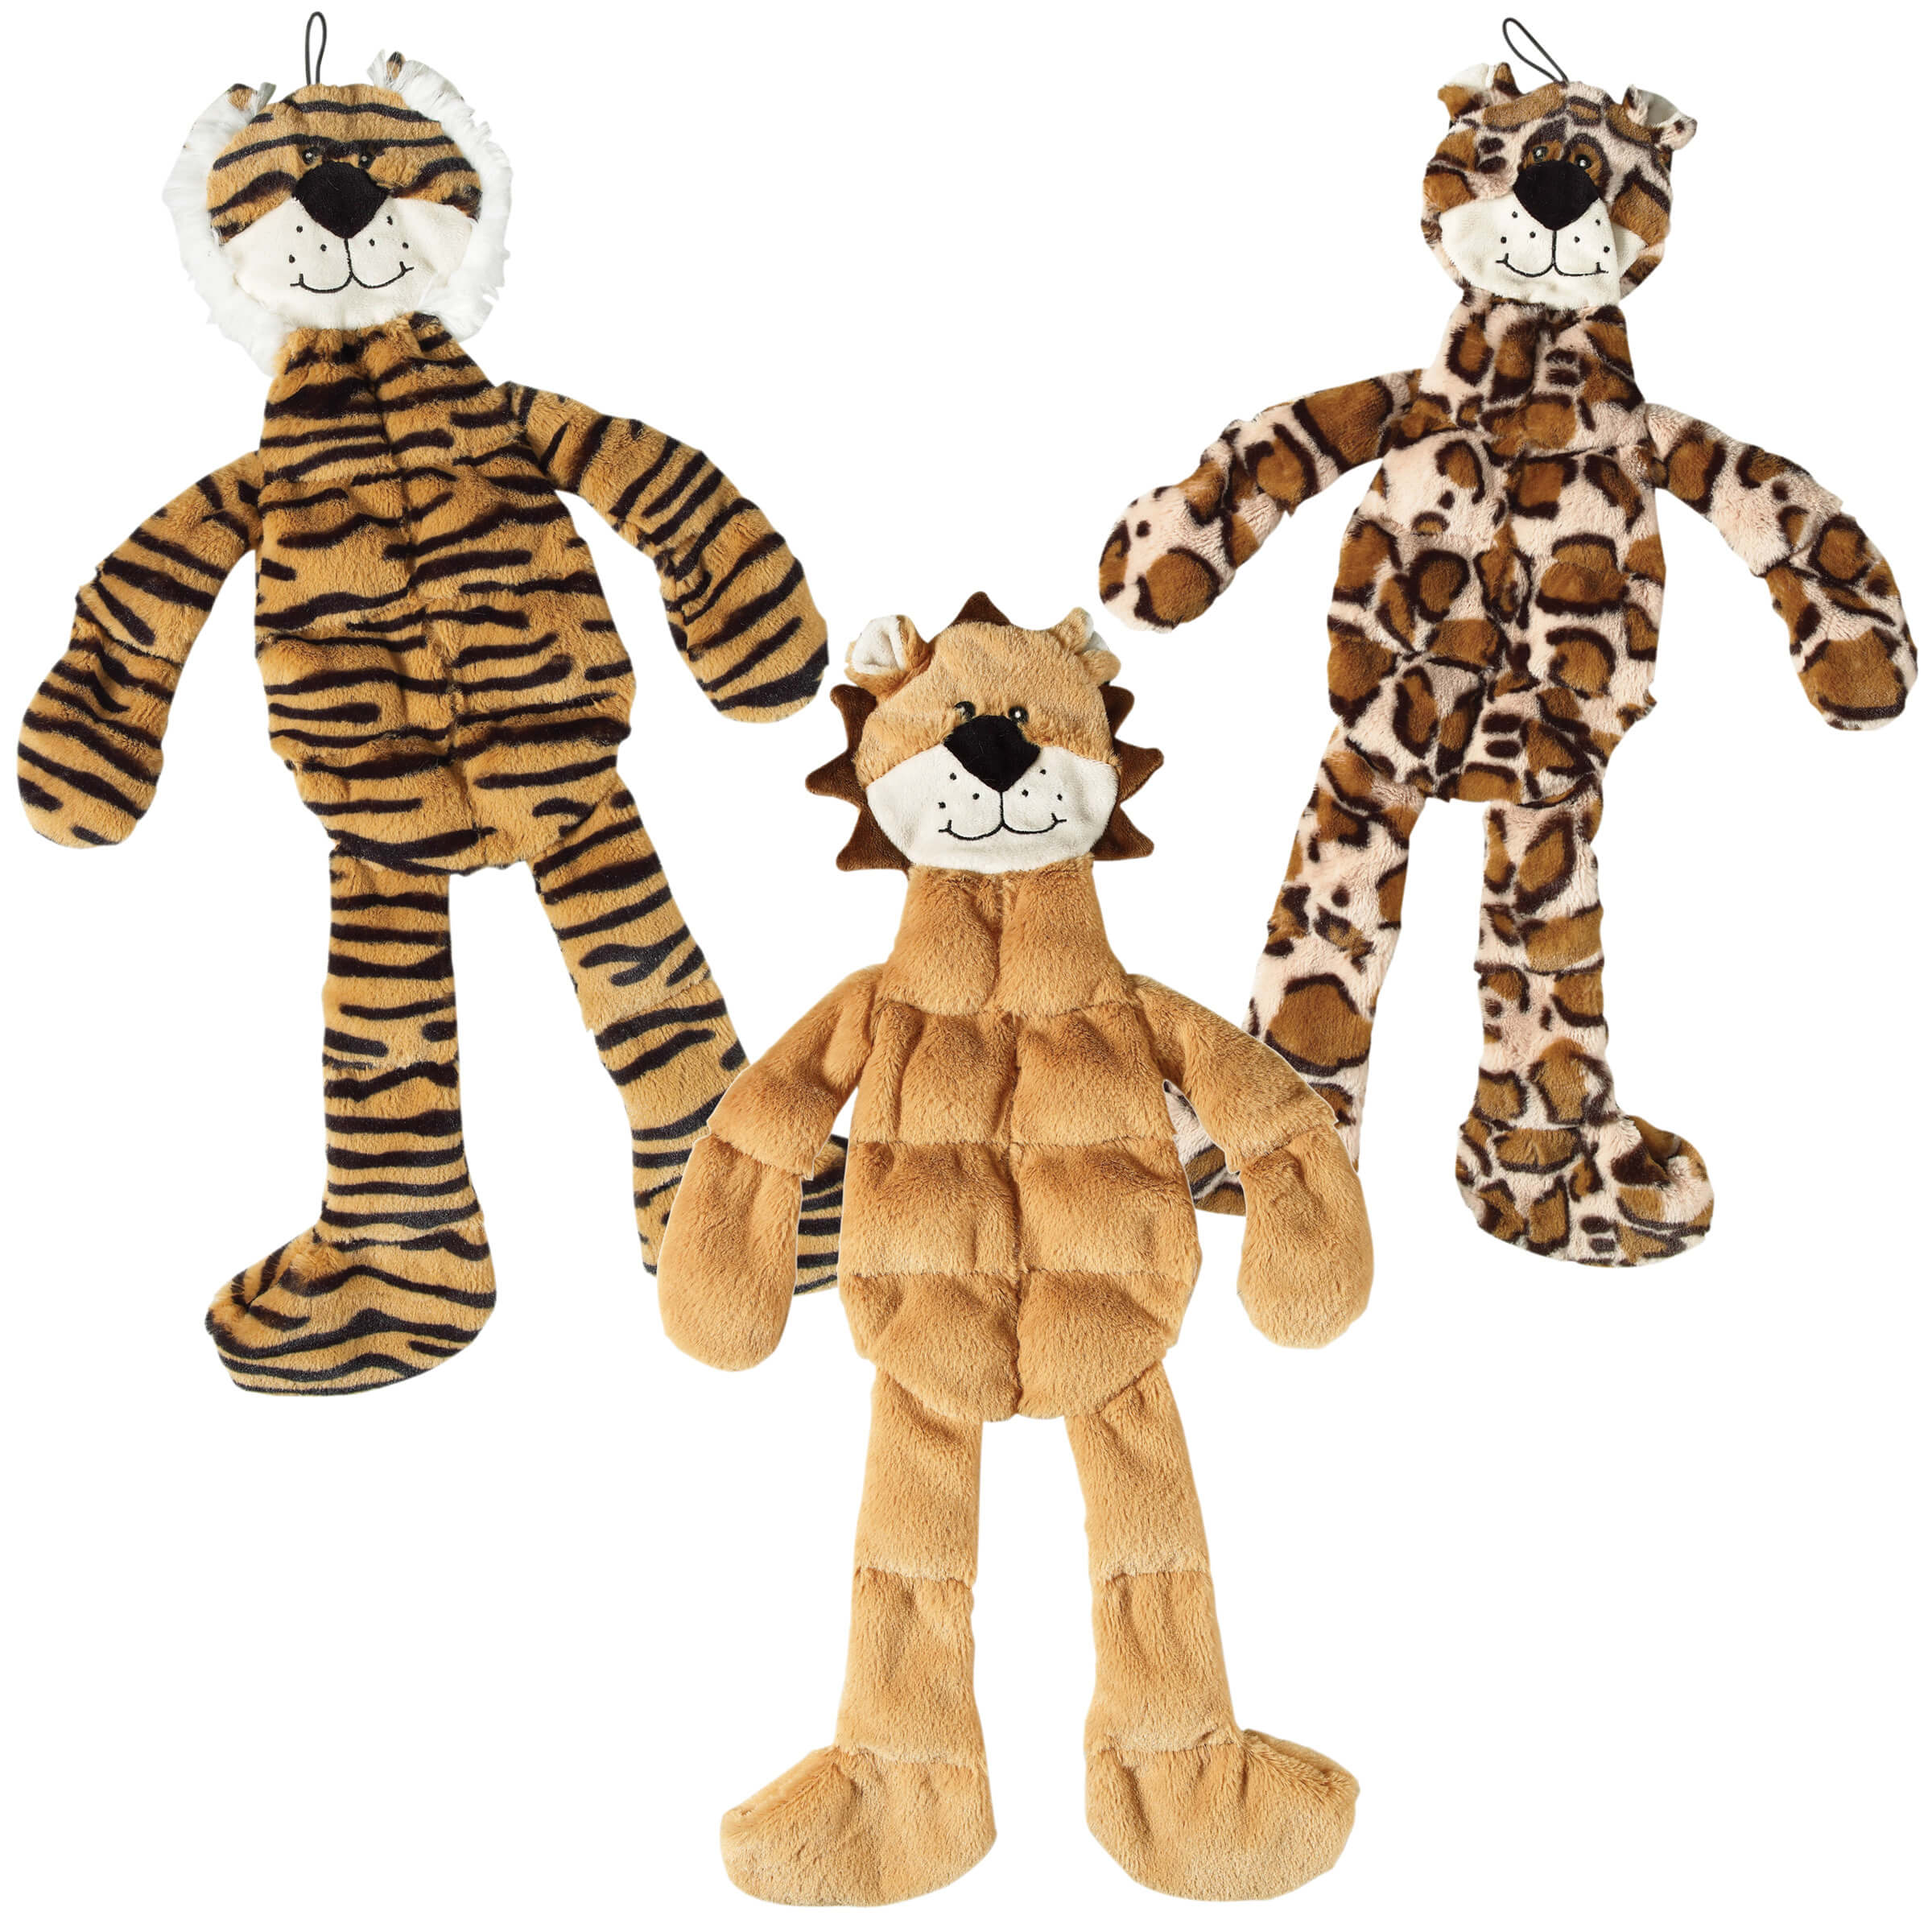 Tons-o-squeakers jungle in assorted patterns (tiger, lion, cheetah)